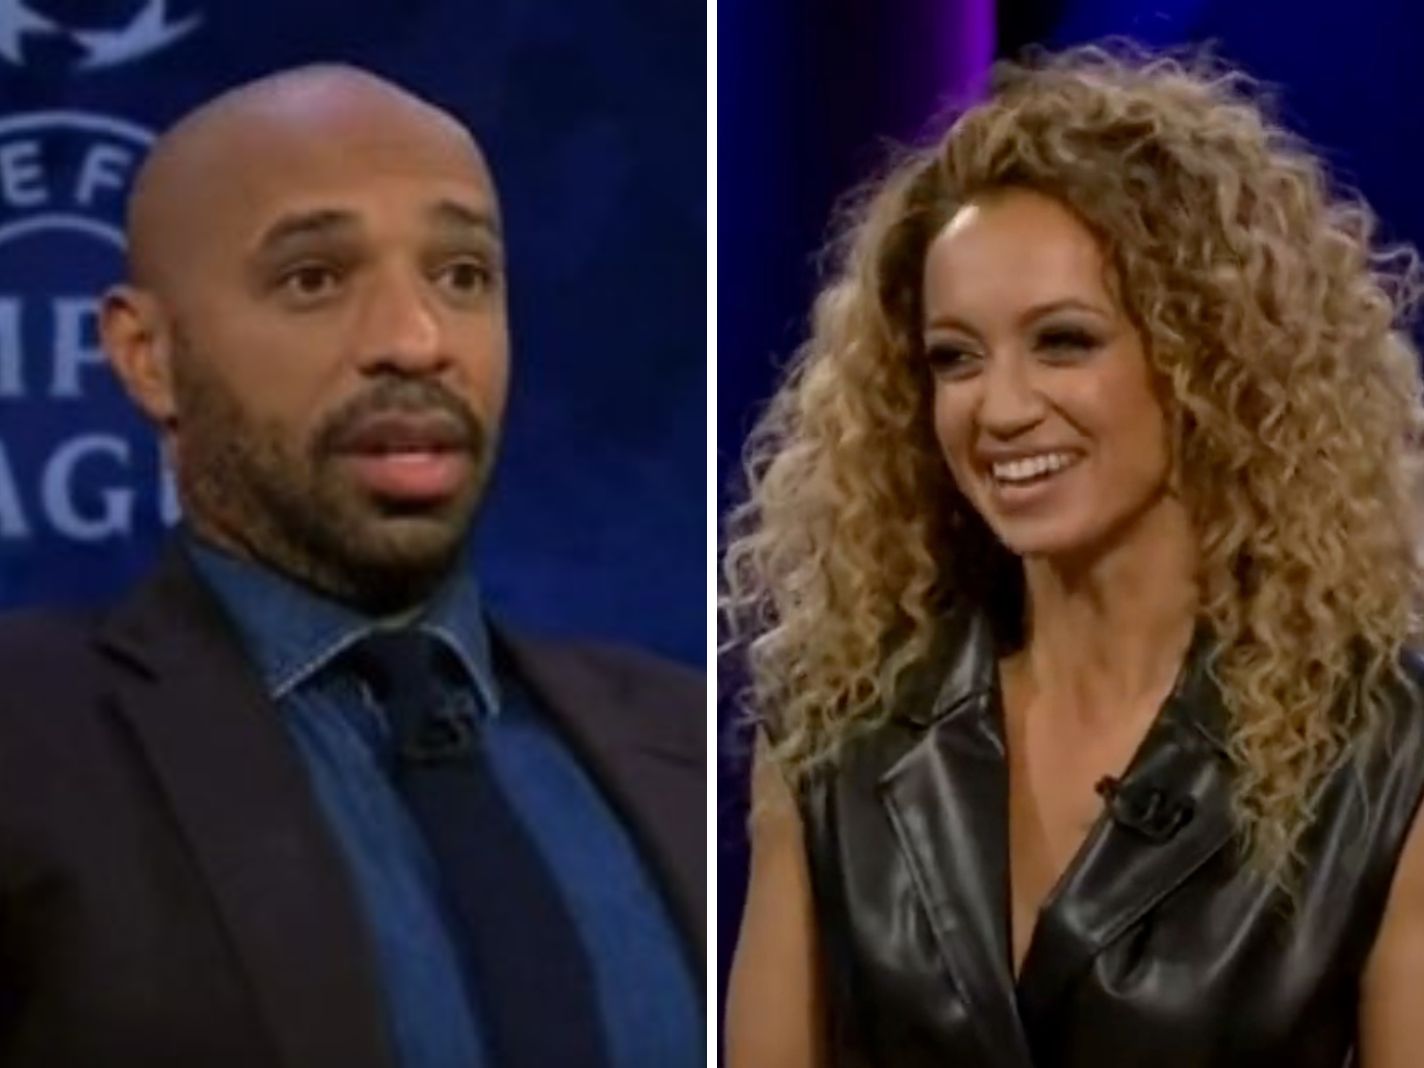 Can We Talk About How Thierry Henry Reacted to News of Kate Abdo’s Engagement